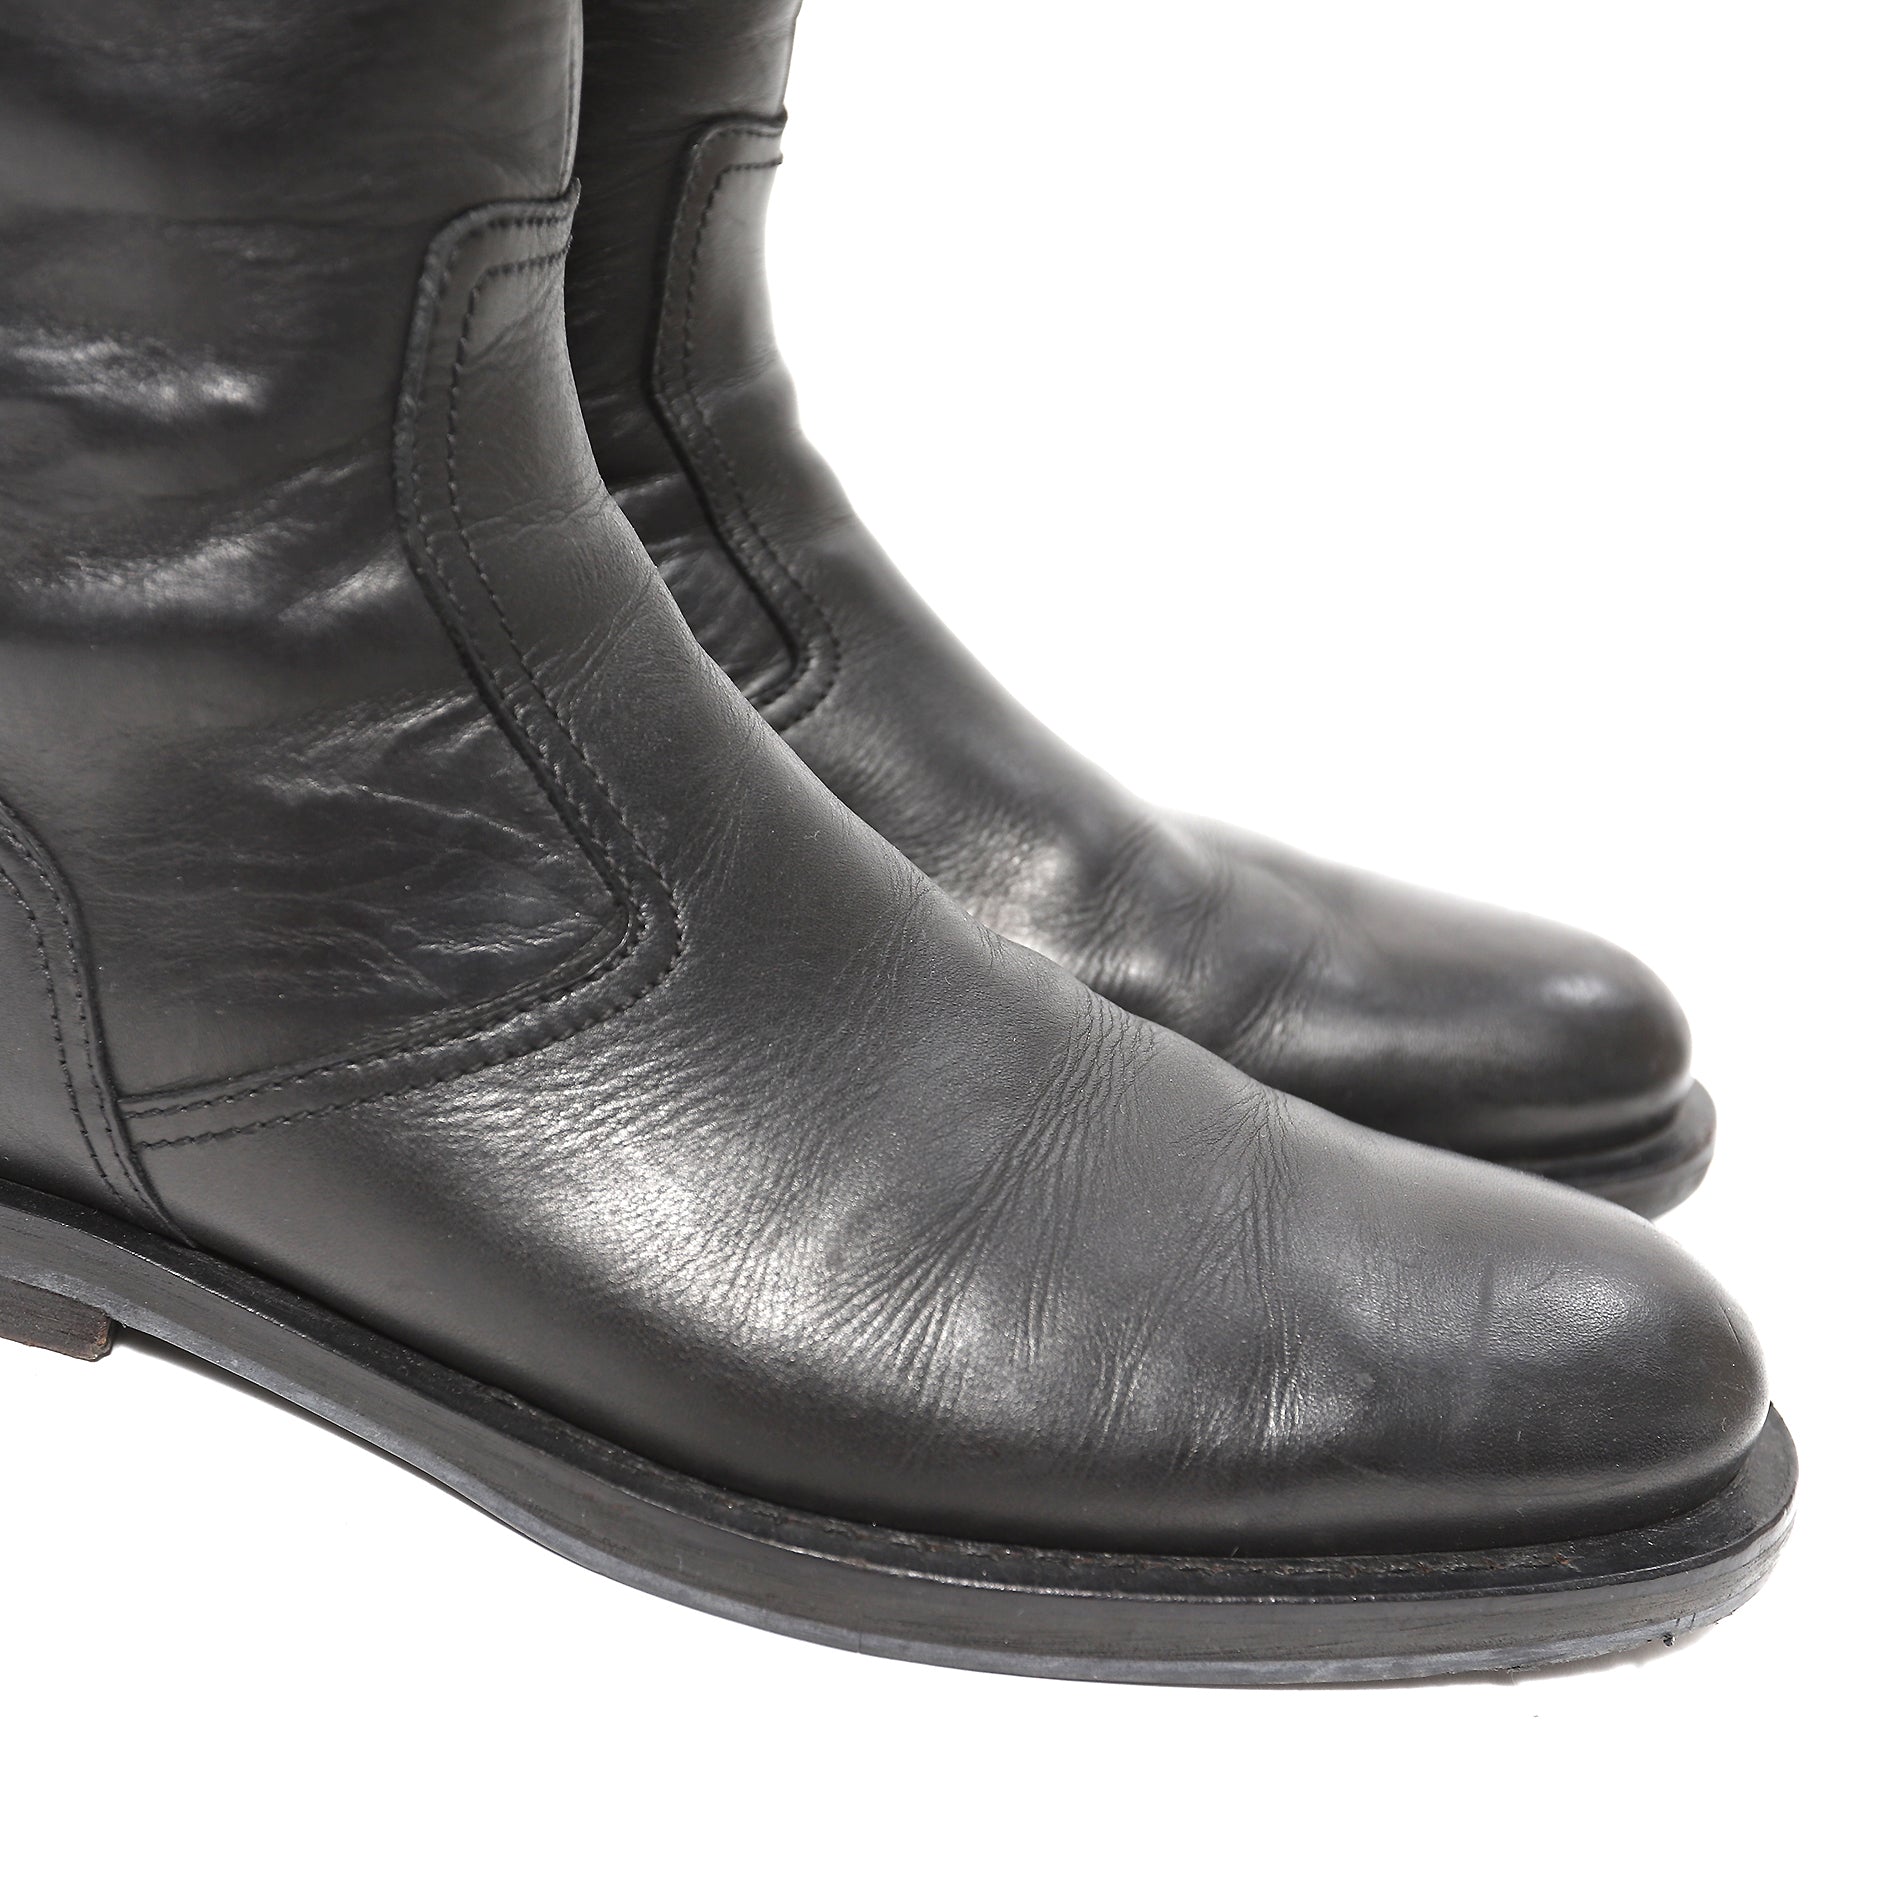 Dior Homme AW04 VOTC Motorcycle Boots